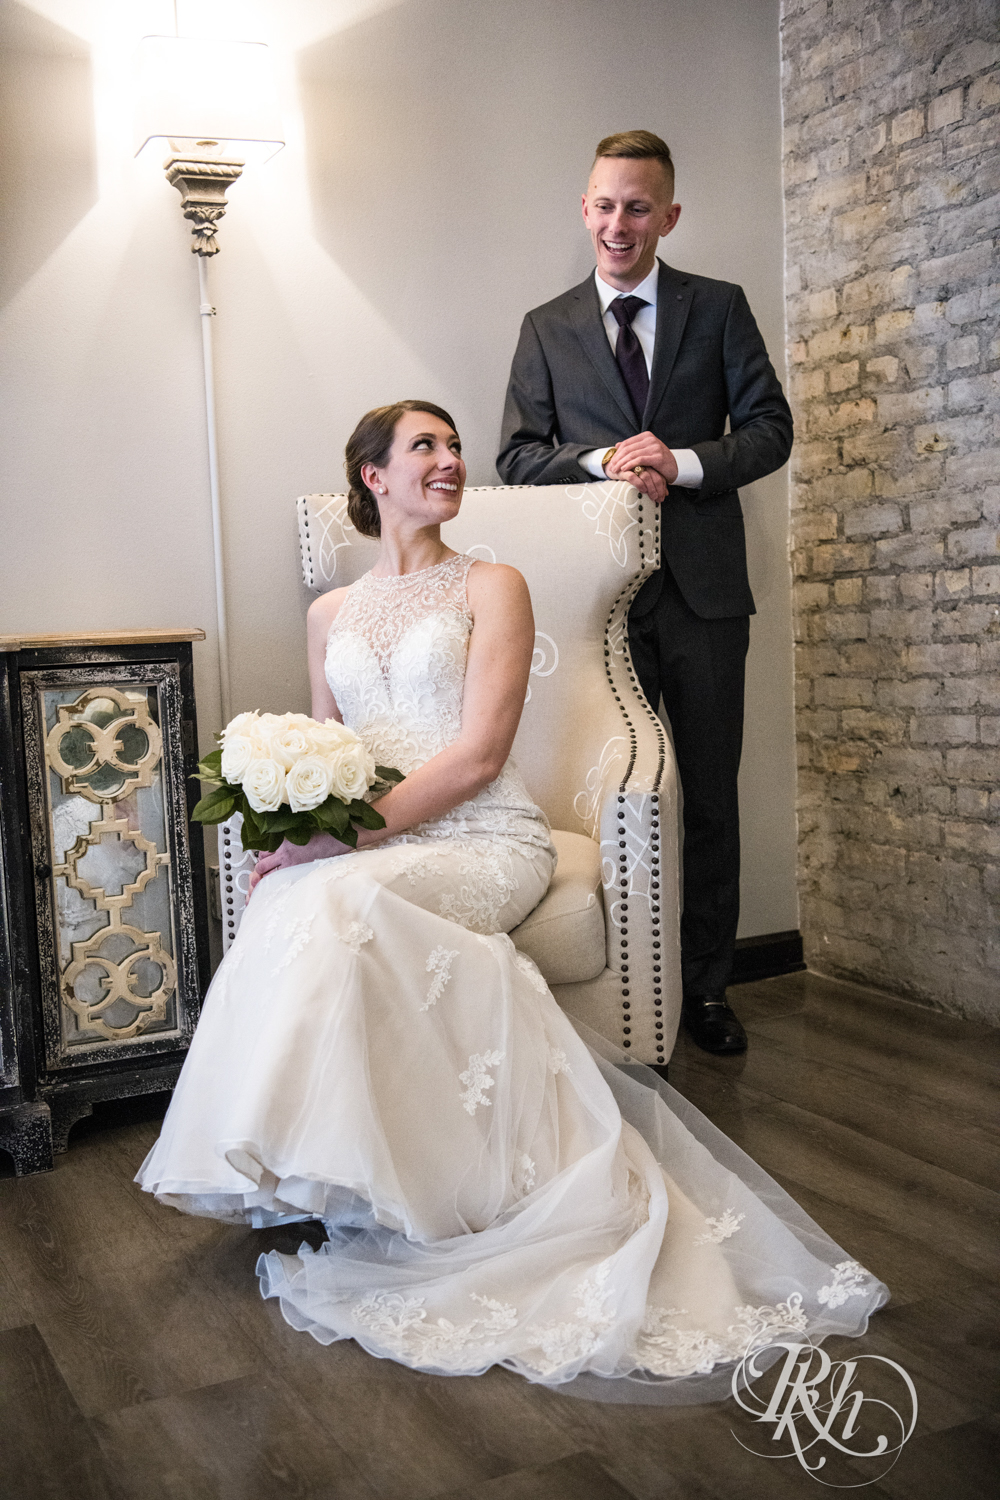 Bride and groom smile in the Lumber Exchange Event Center in Minneapolis, Minnesota.